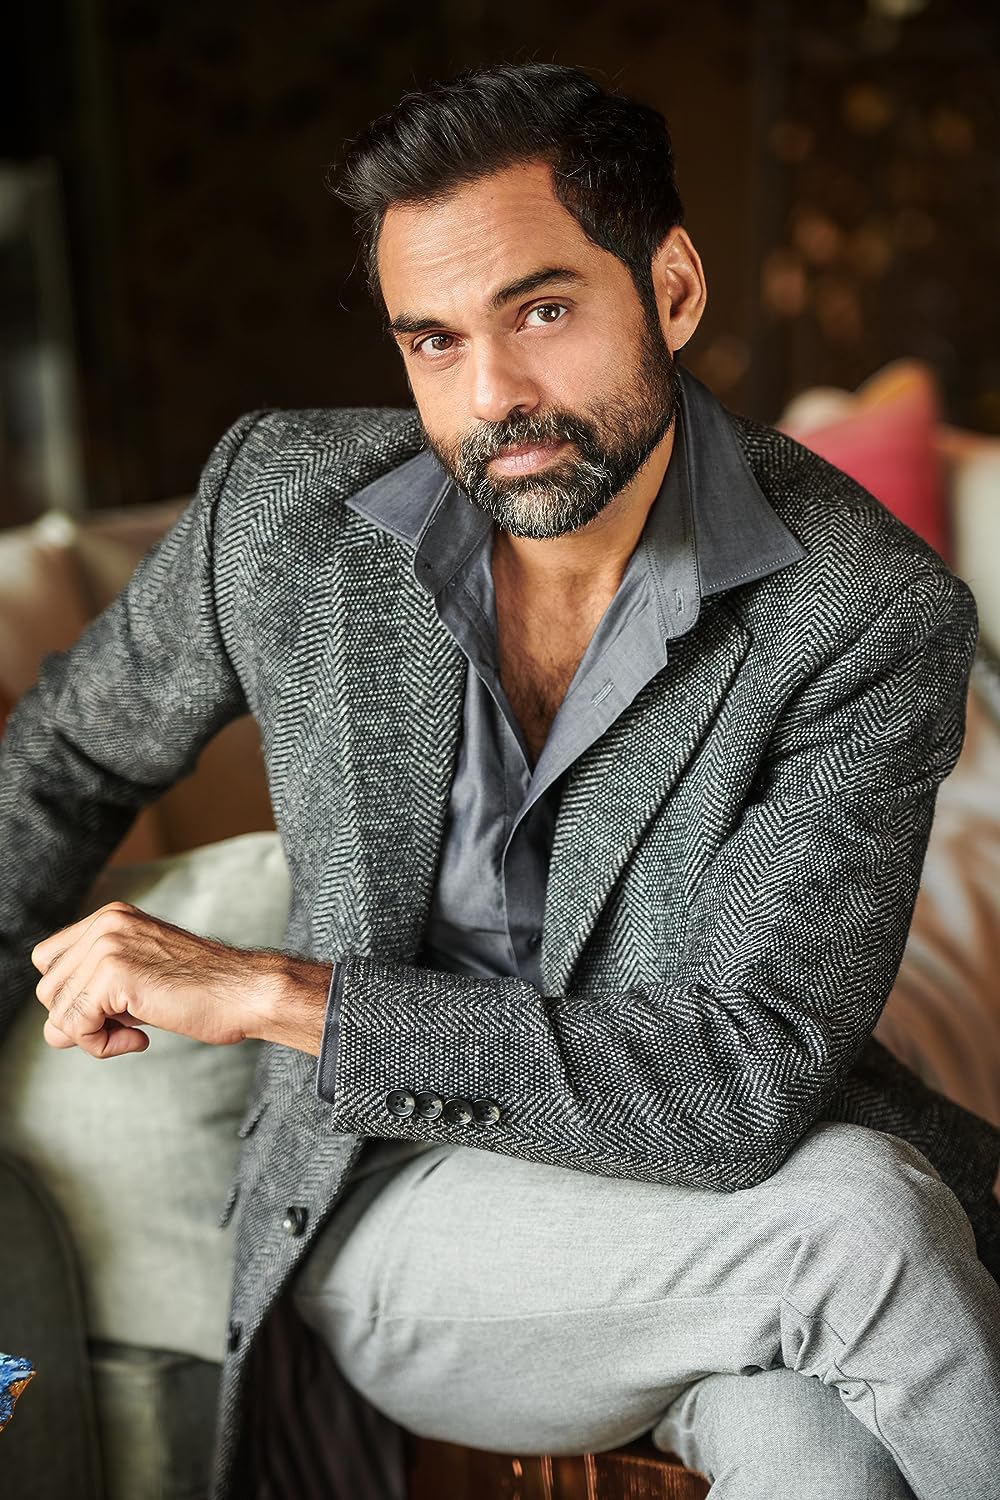 Abhay Deol: Abhay took a different path, focusing on complex characters and independent films. His debut in 